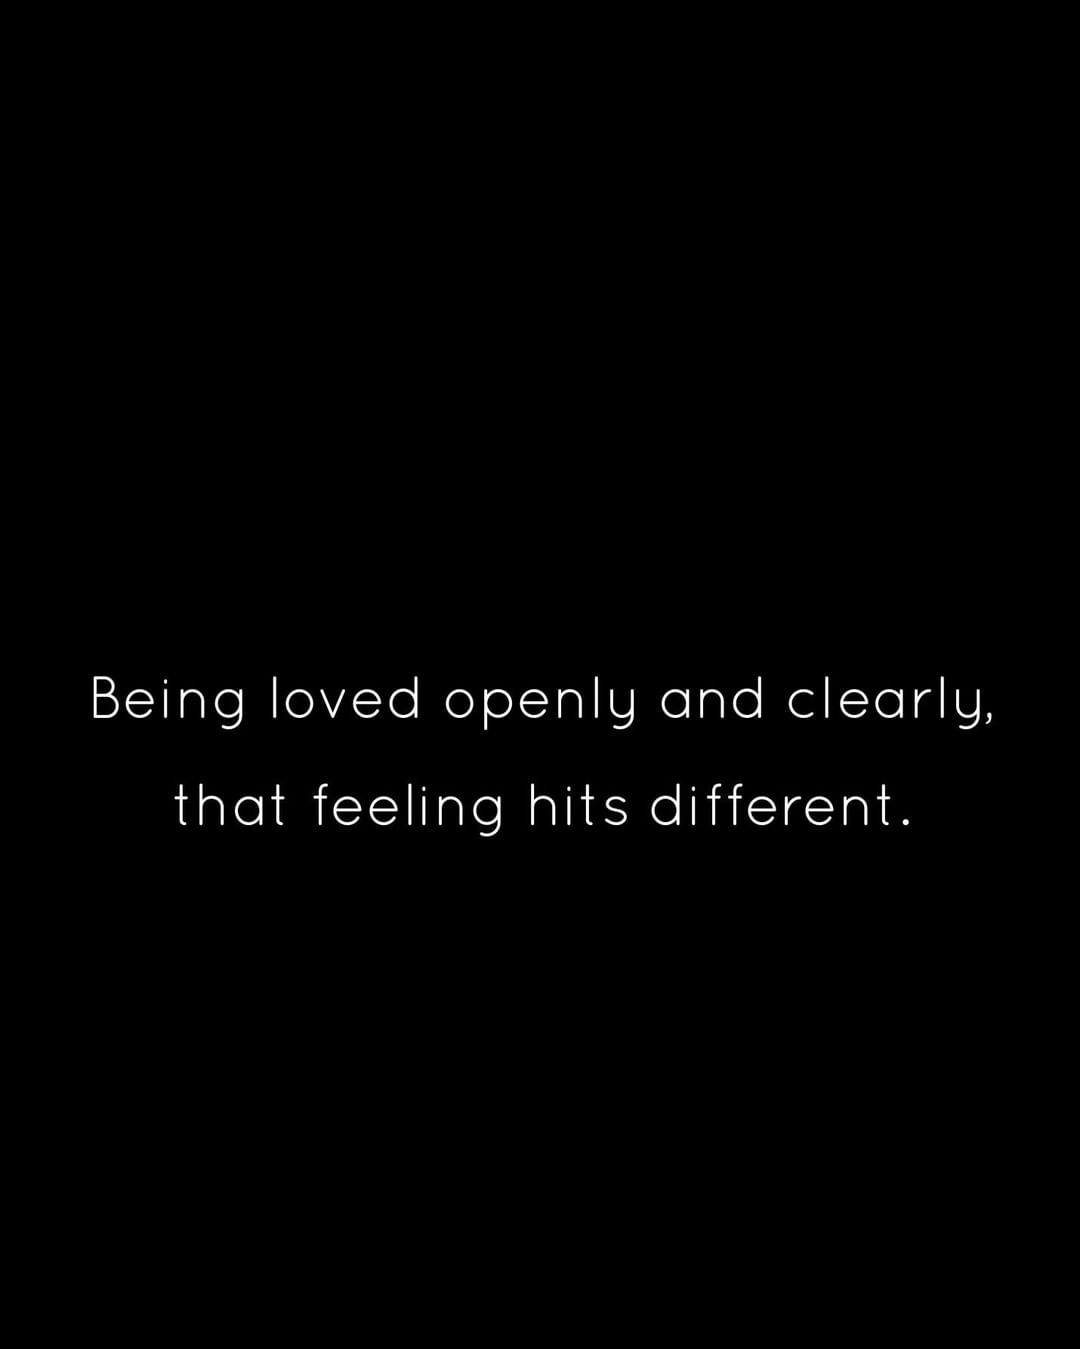 Being loved openly and clearly, that feeling hits different.